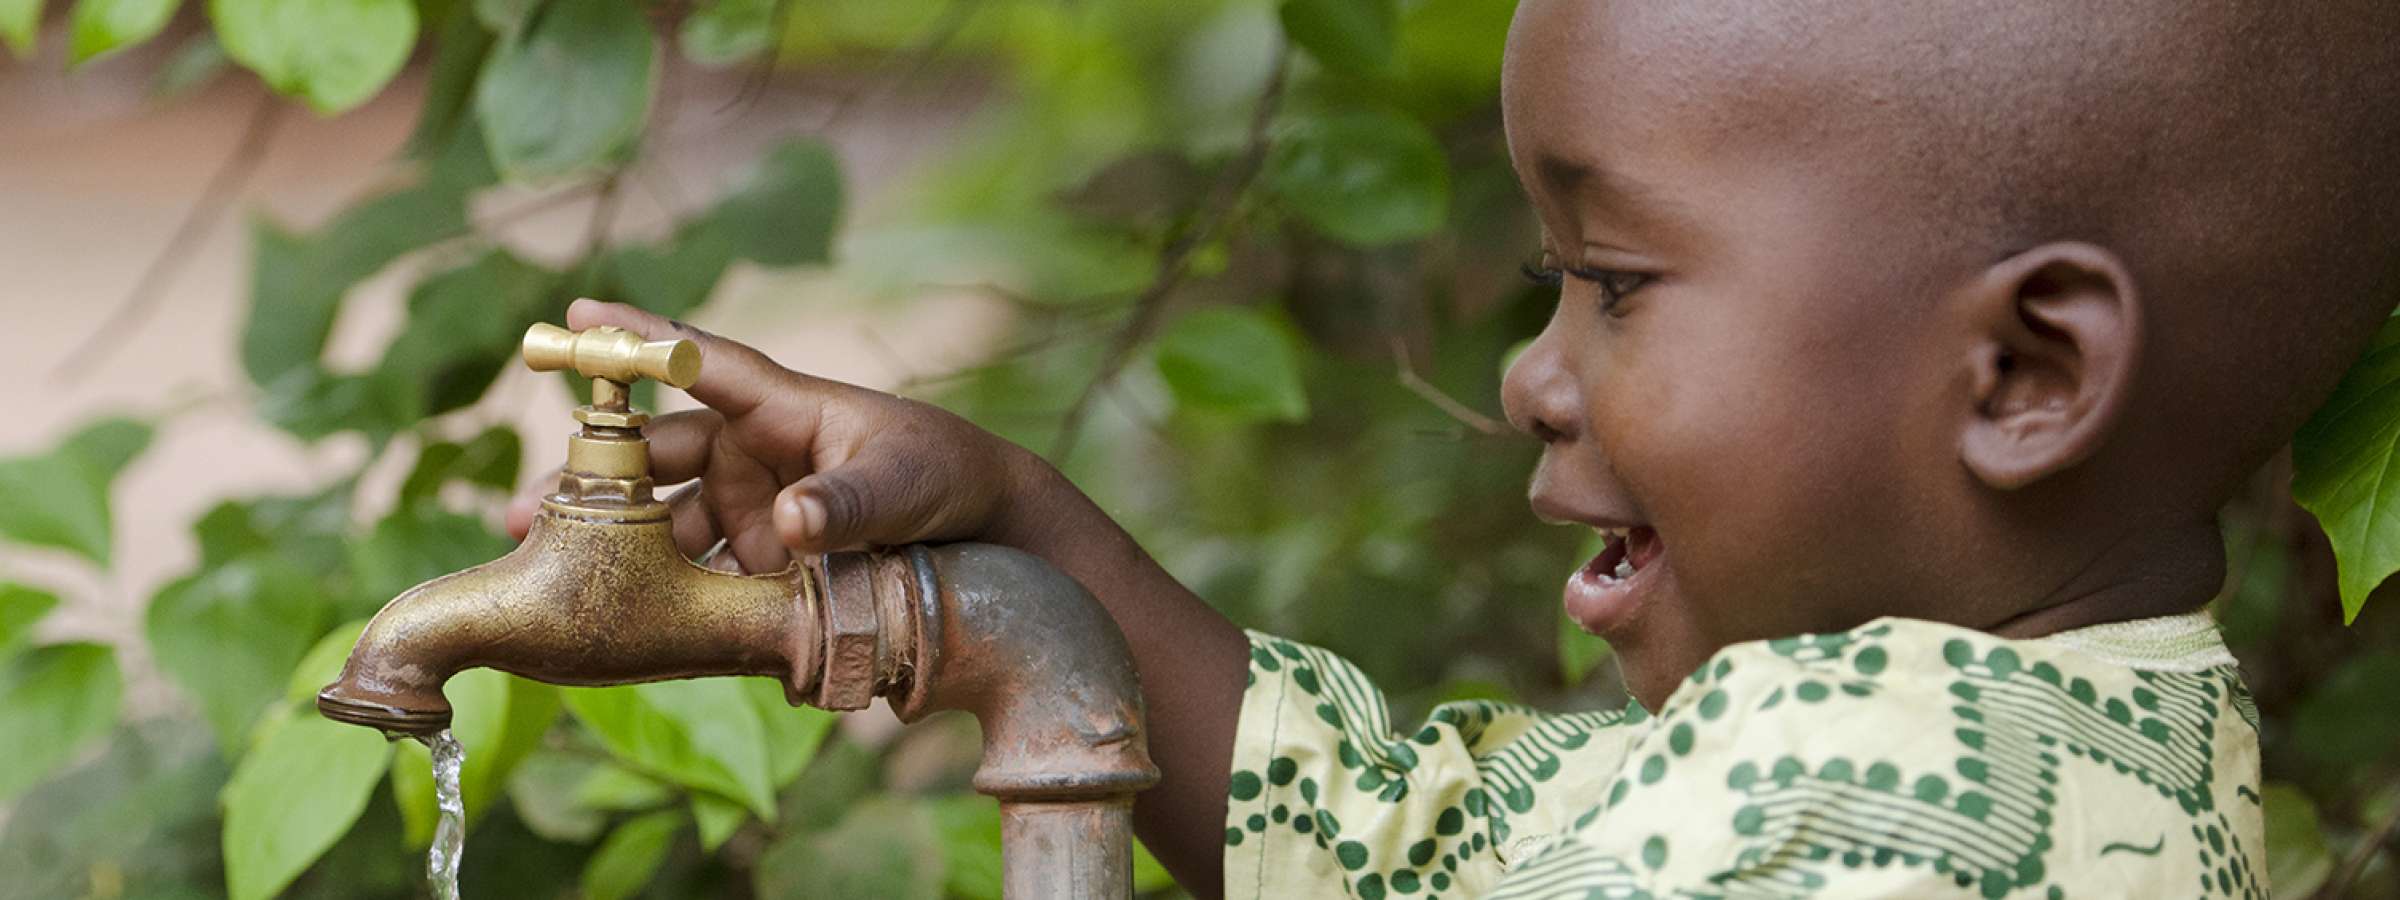 Water scarcity problems concern the inadequate access to safe drinking water.